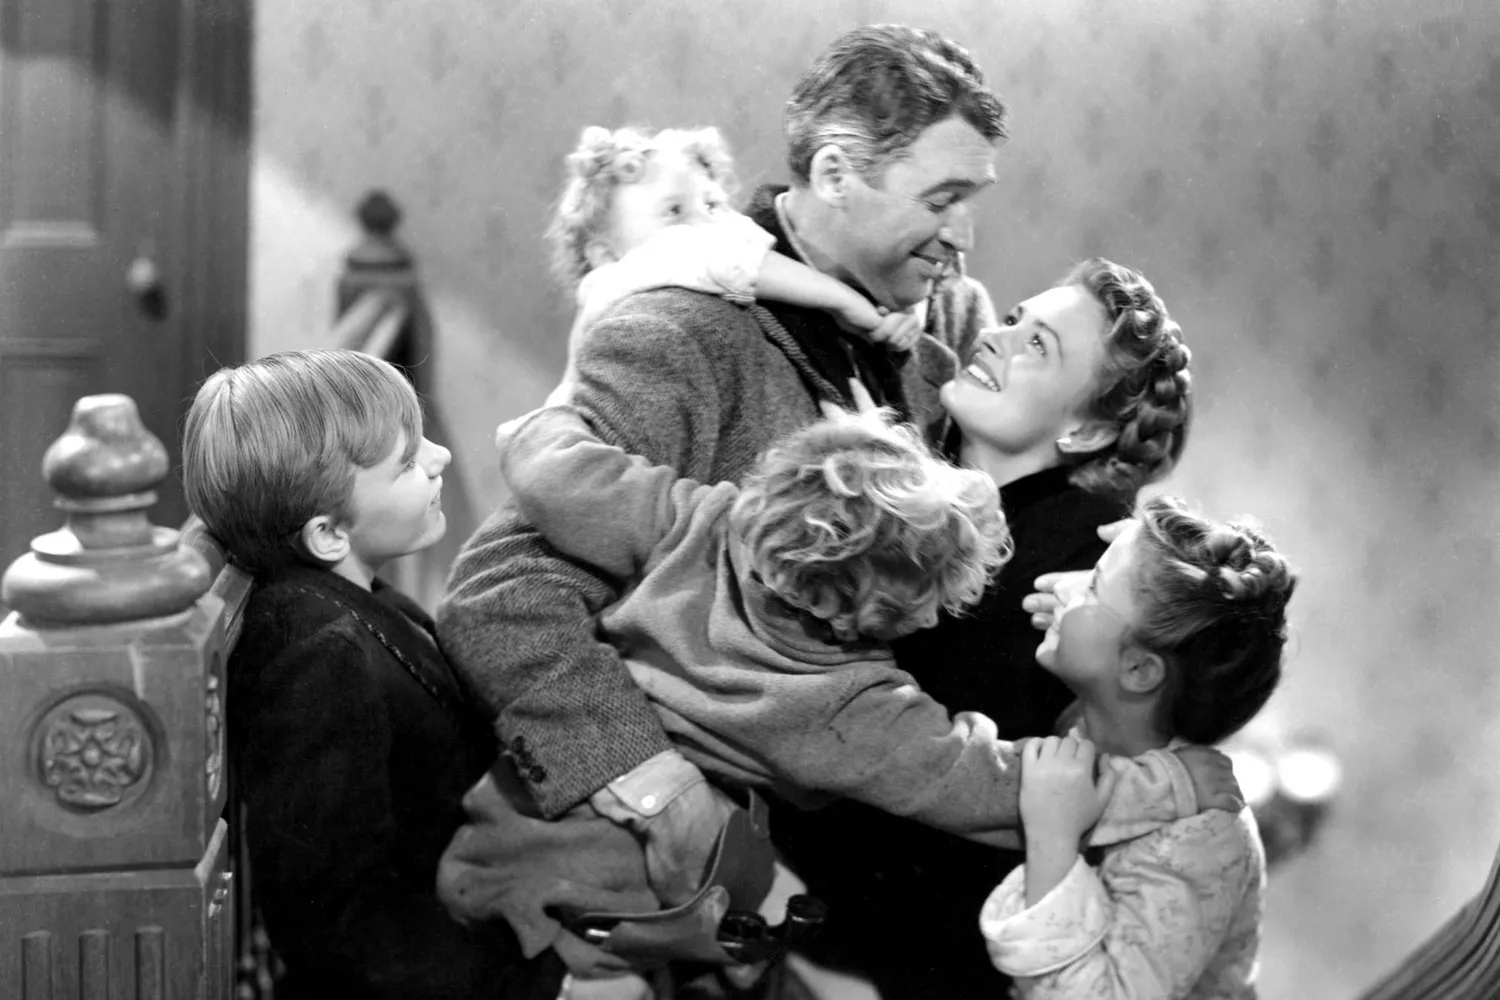 James Stewart, Donna Reed, Carol Coombs, Jimmy Hawkins, Larry Simms et Karolyn Grimes dans "It's a Wonderful Life" circa 1946 | Source : Getty Images